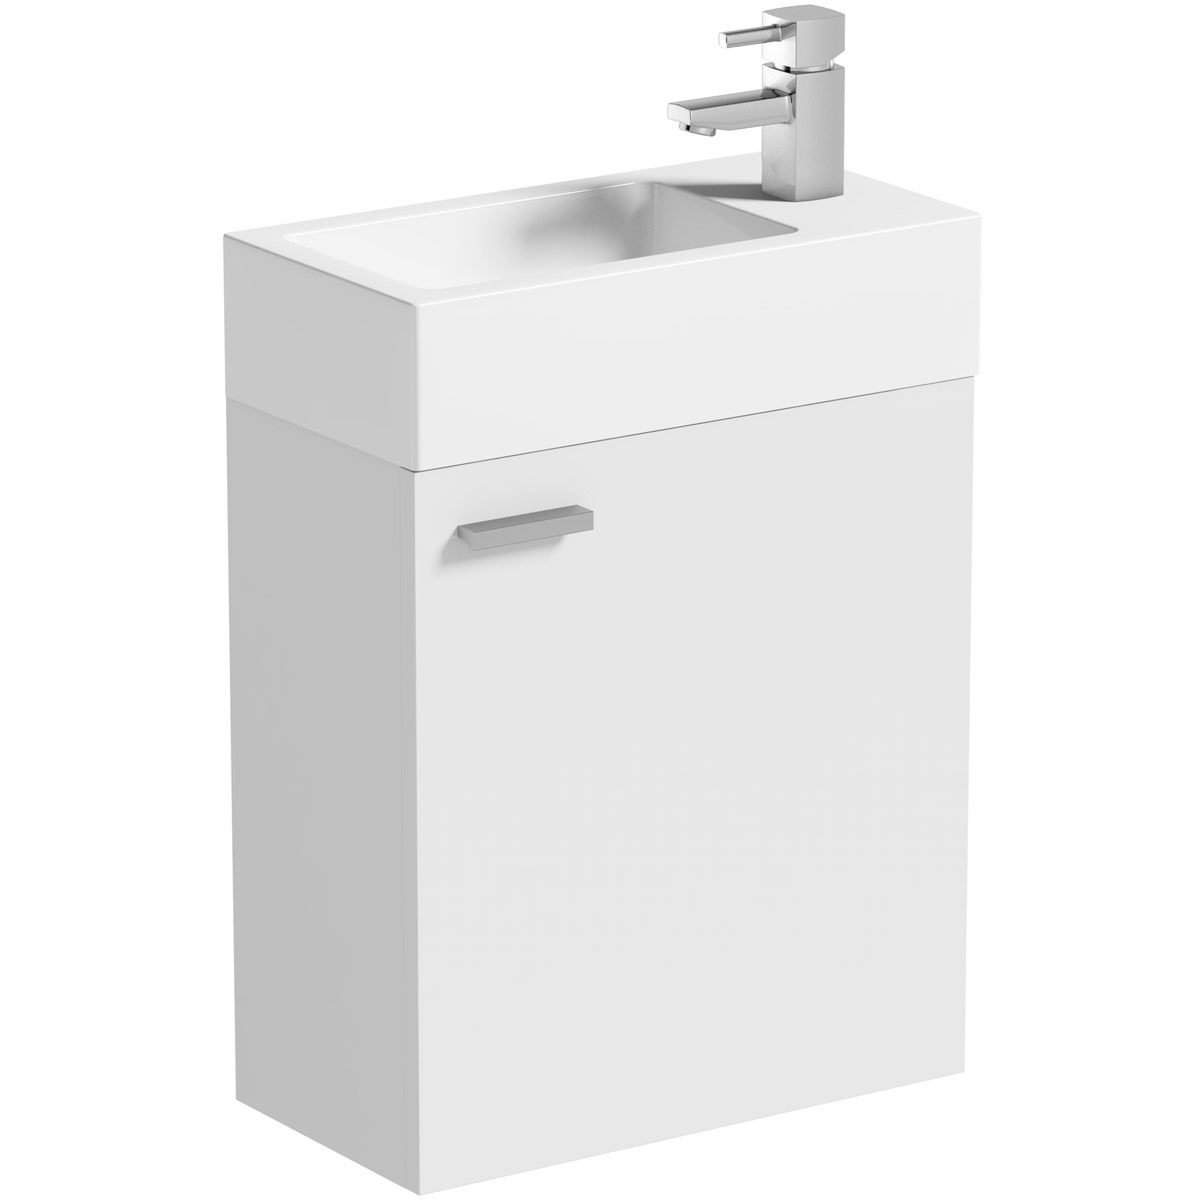 Clarity Compact white wall hung vanity unit and basin 410mm with tap